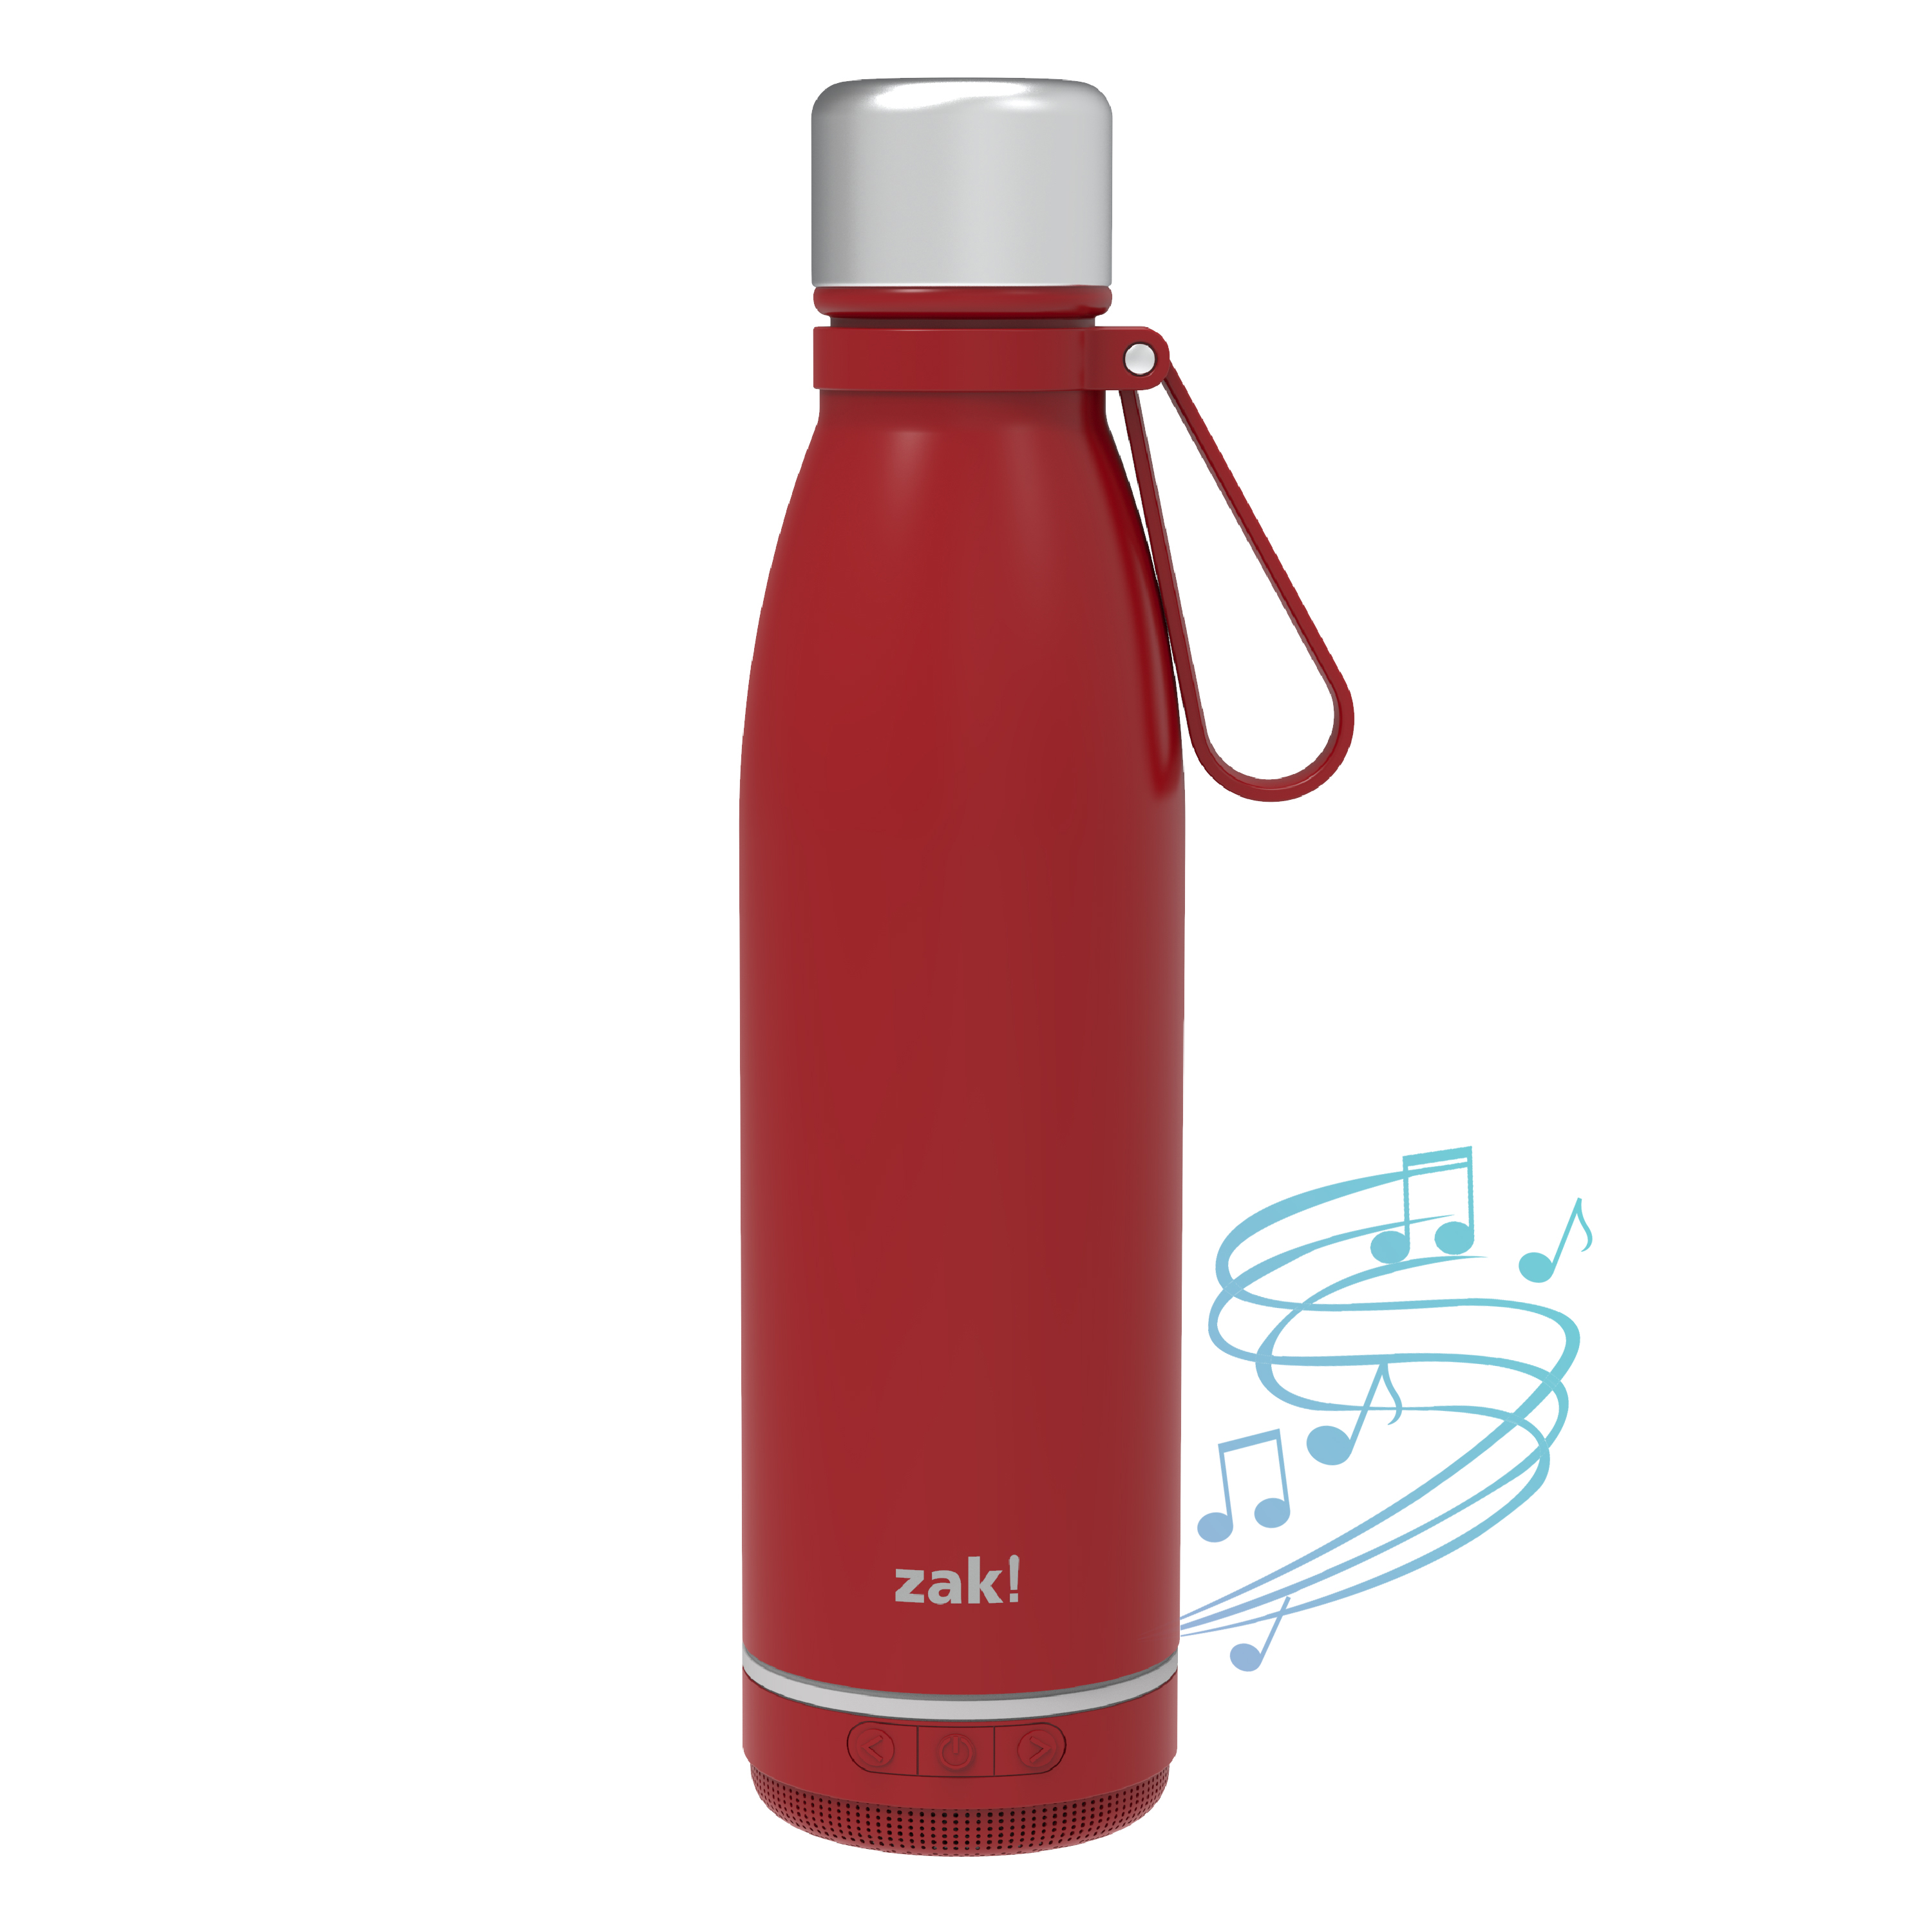 Zak Play 17.5 ounce Stainless Steel Tumbler with Bluetooth Speaker, Red slideshow image 1